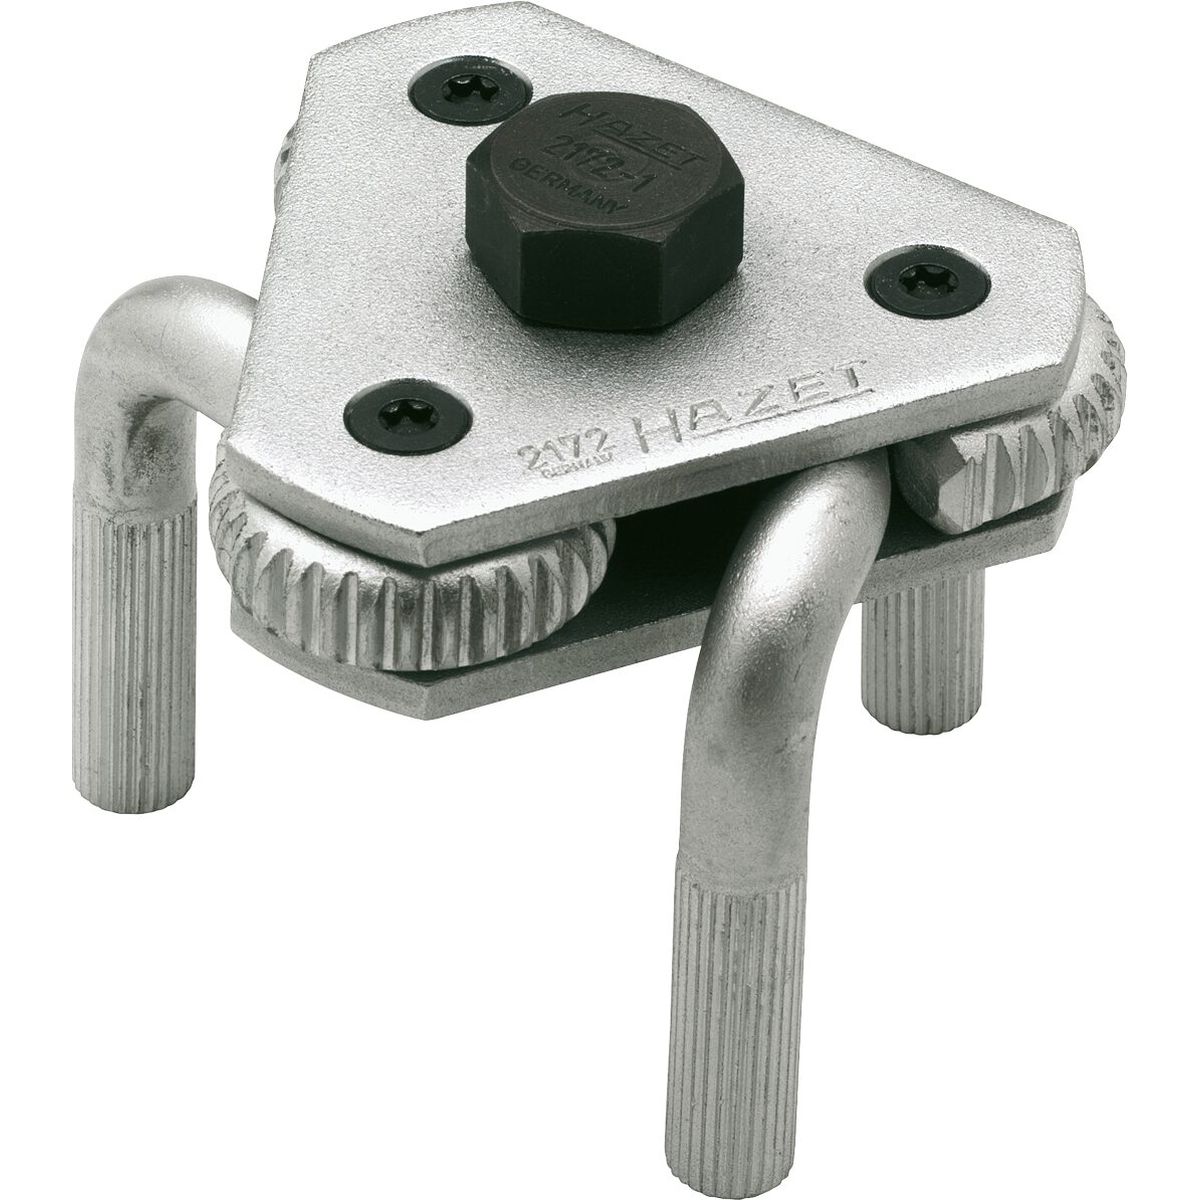 Oil Filter Wrench No.2172 Hazet®